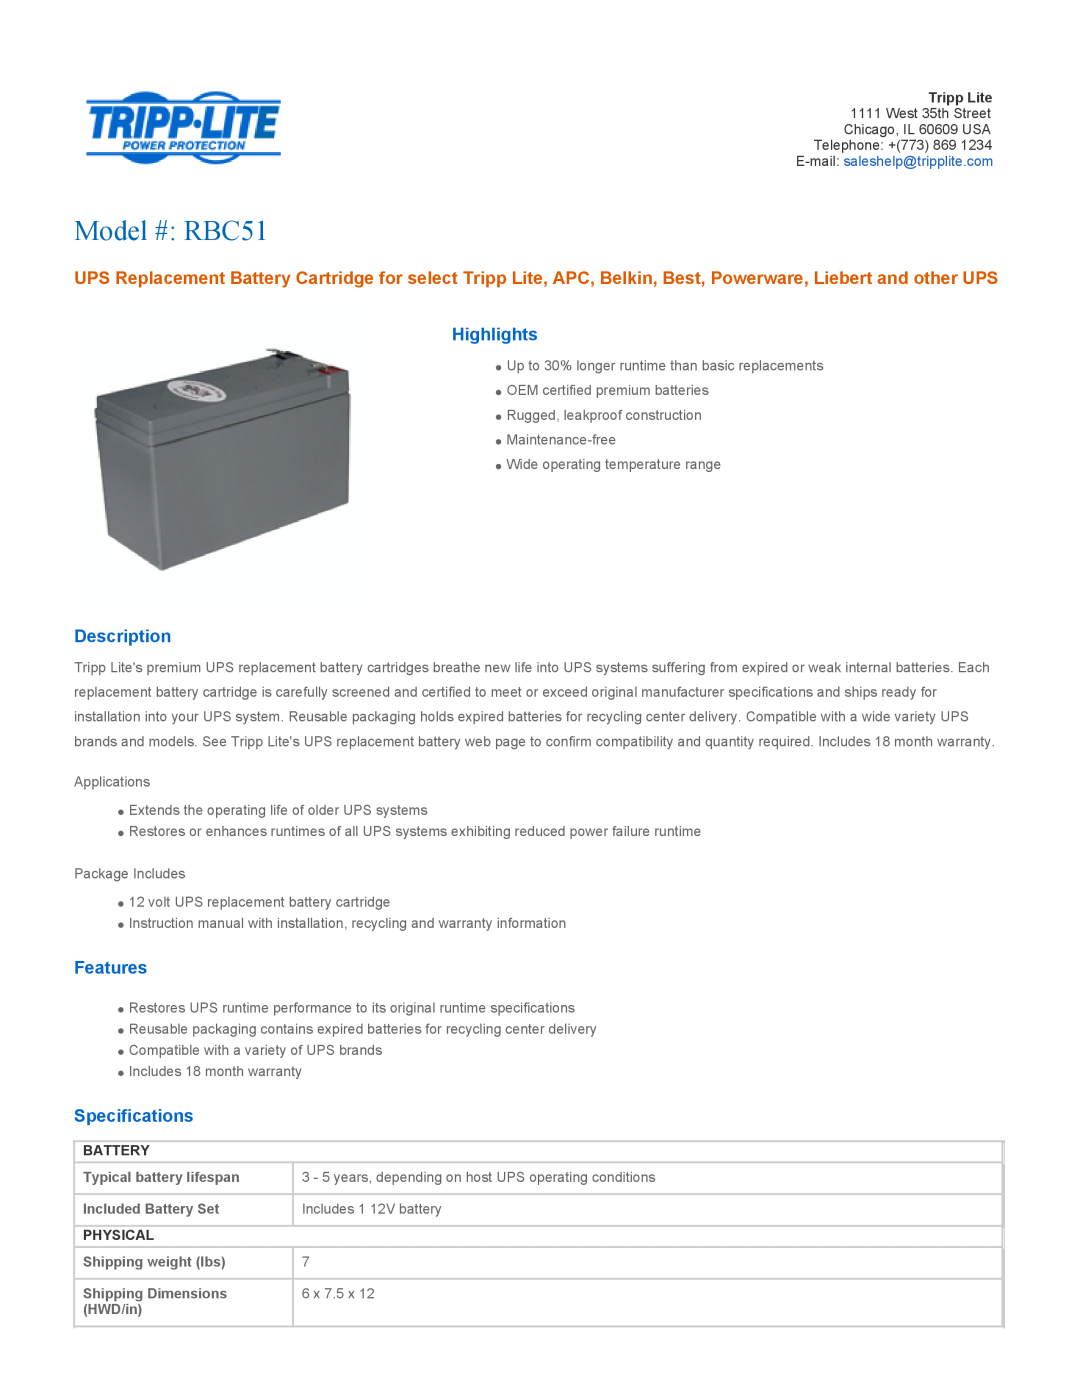 Tripp Lite RBC51 specifications Battery, Typical battery lifespan, 3 - 5 years, depending on host UPS operating conditions 